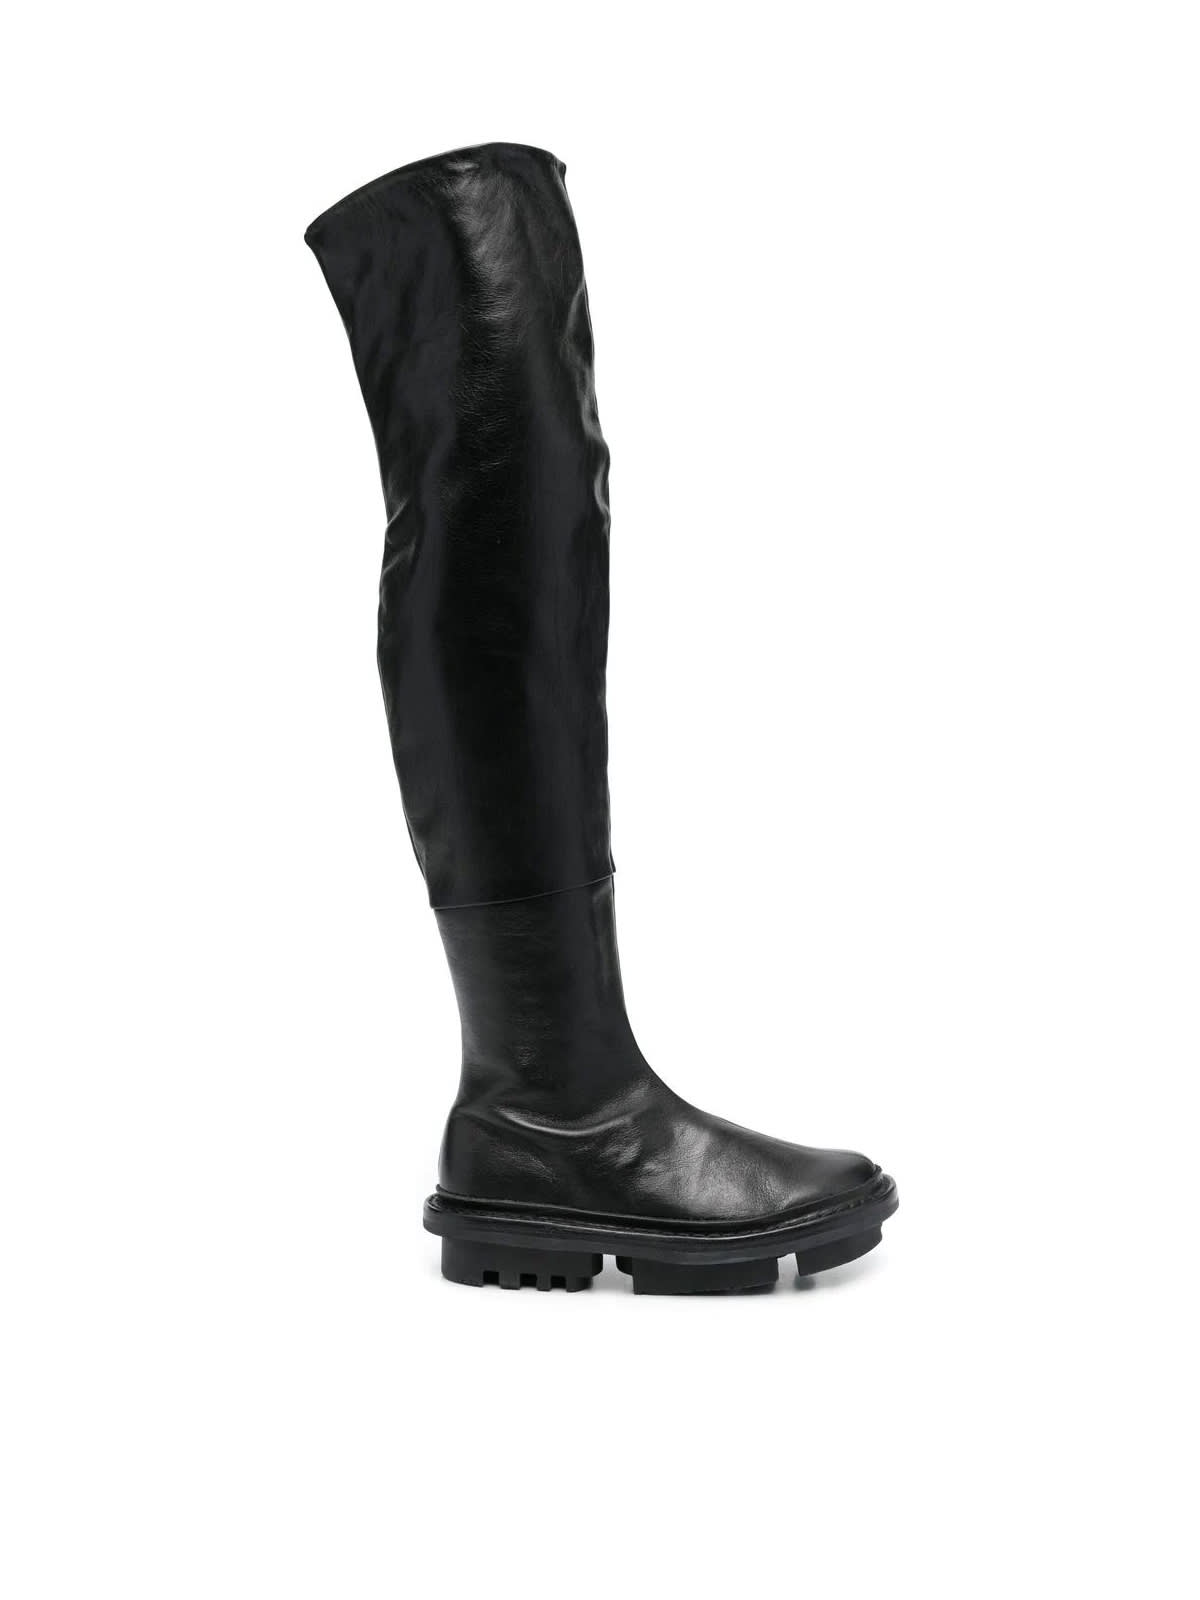 Stage Boots With Side Zip